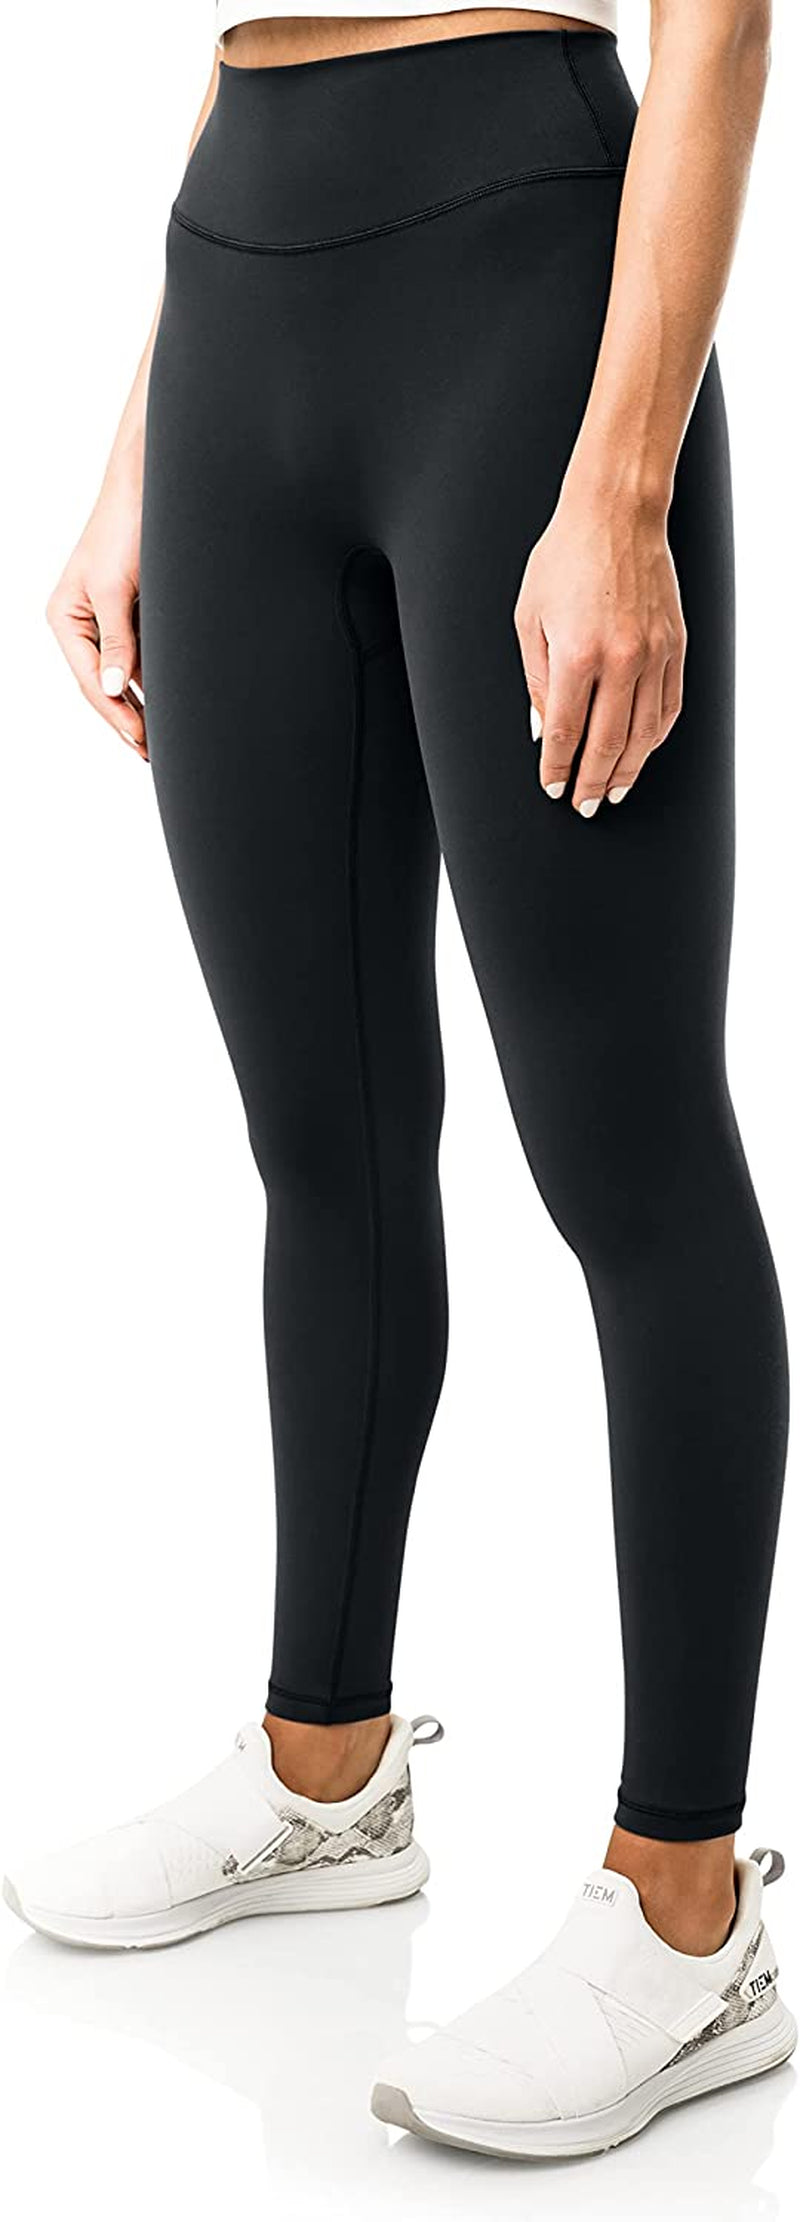 Kamo Fitness Serenity No Front Seam Leggings 25 Inseam Yoga Pants High  Waisted Soft Workout Tights